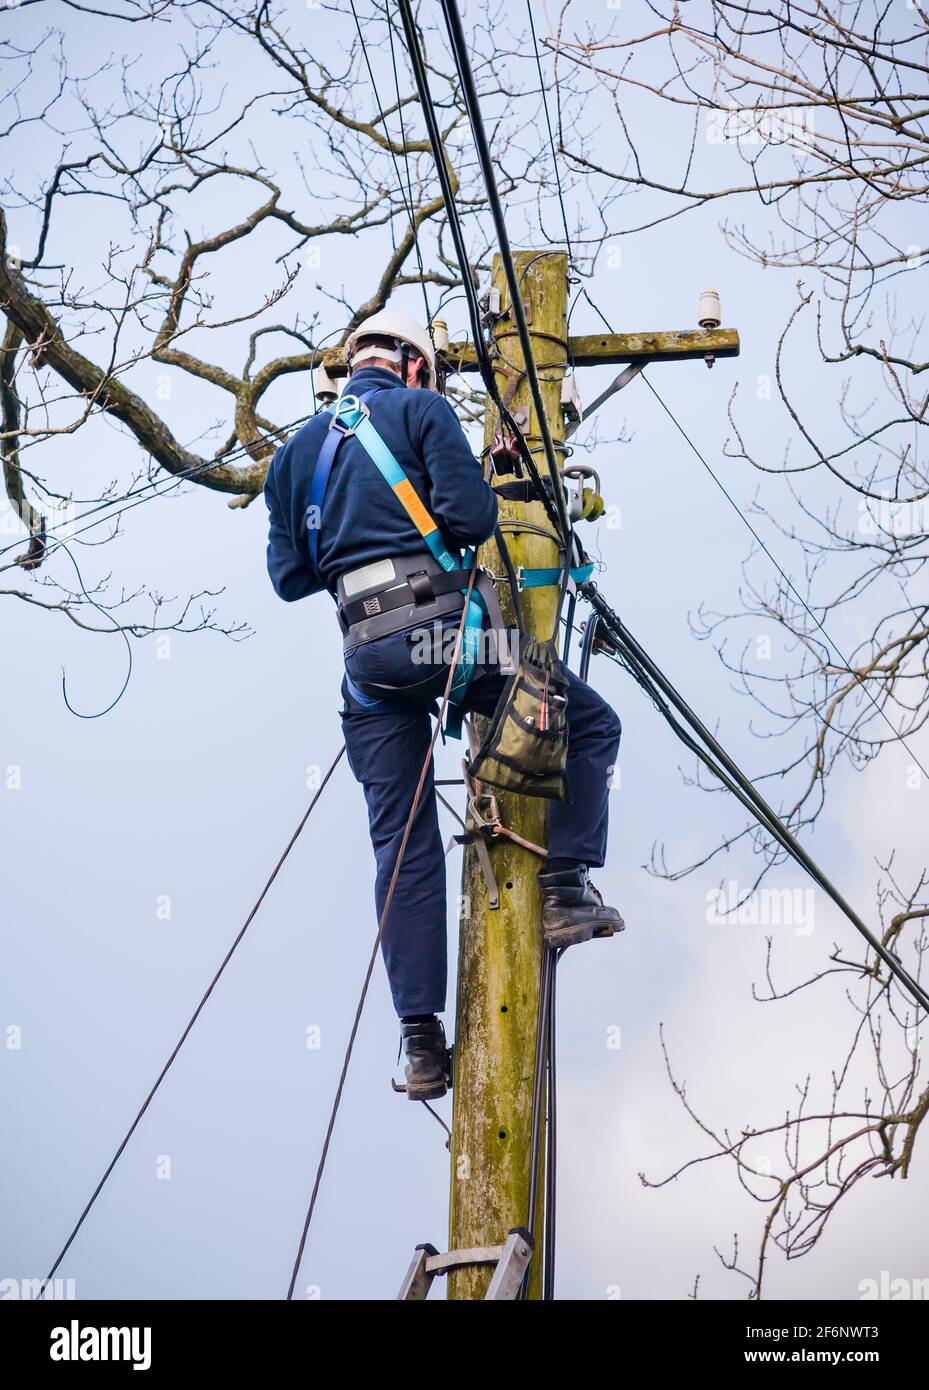 CONWY, UK - February 29, 2012. BT Openreach telecoms engineer repairing an overhead phone line. Technician working on a telegraph pole in Snowdonia, W Stock Photo